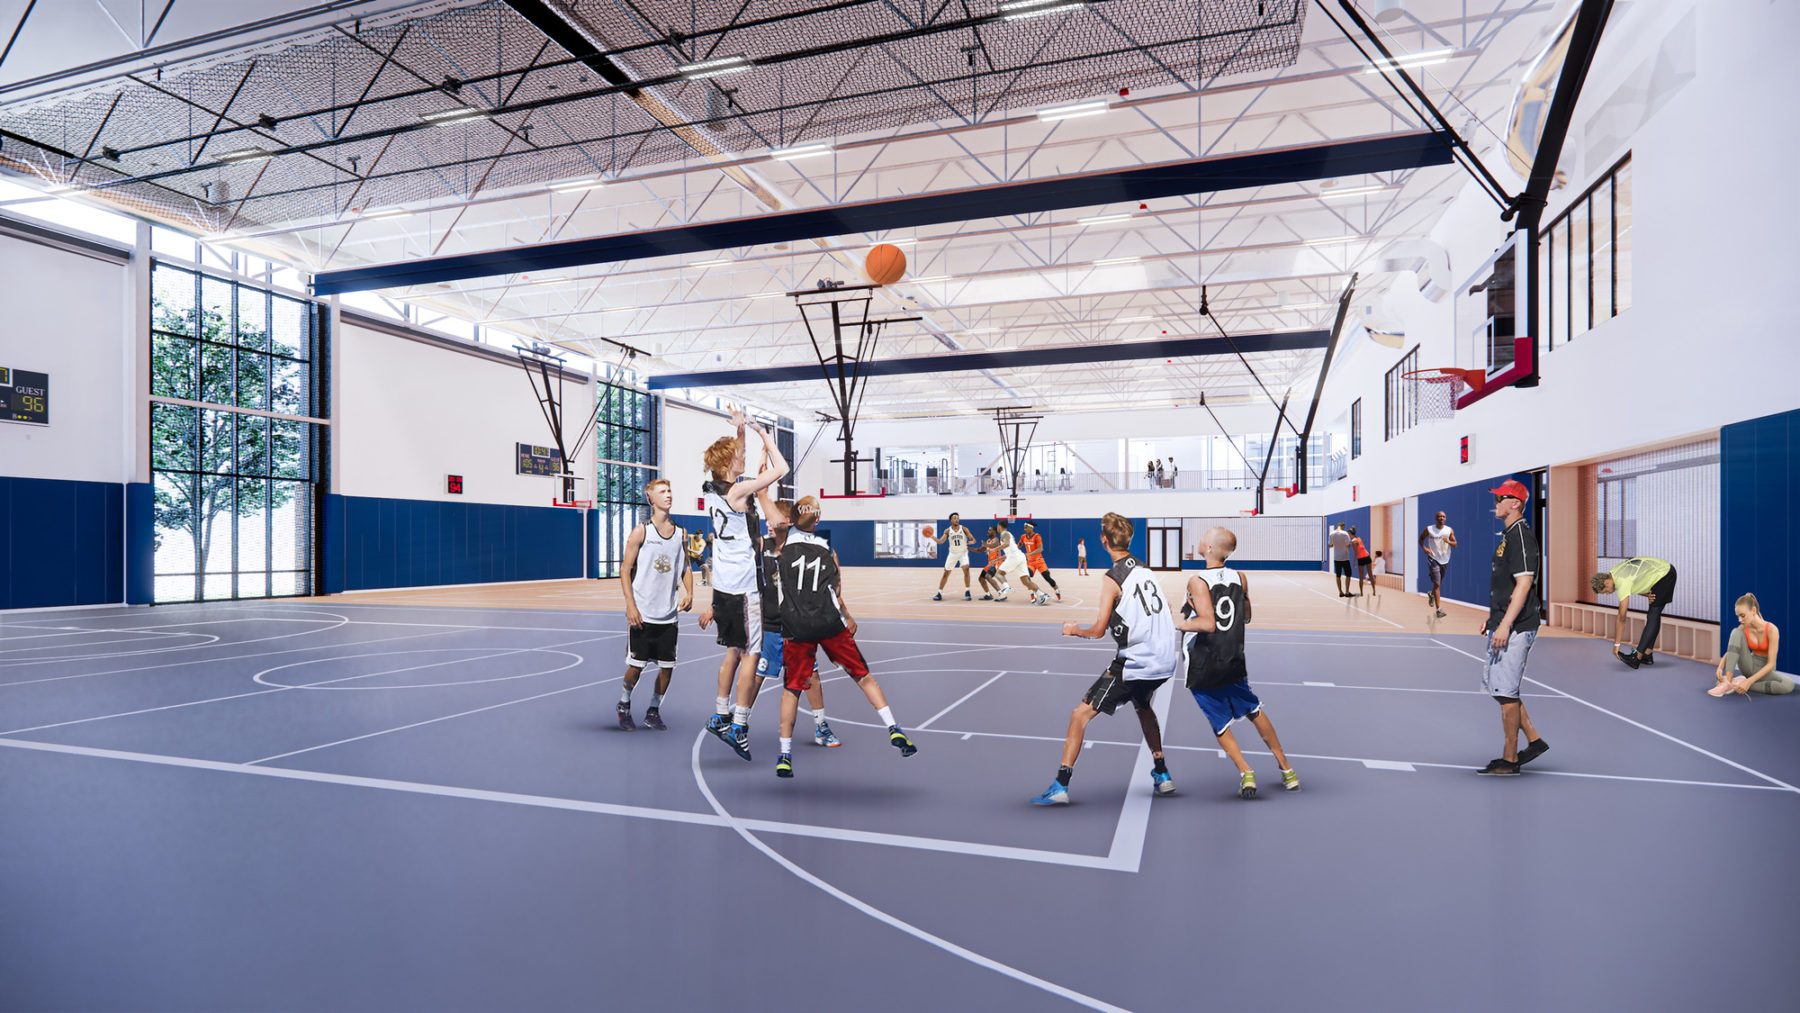 interior rendering of gymnasium. A group of students play basketball in the foreground.